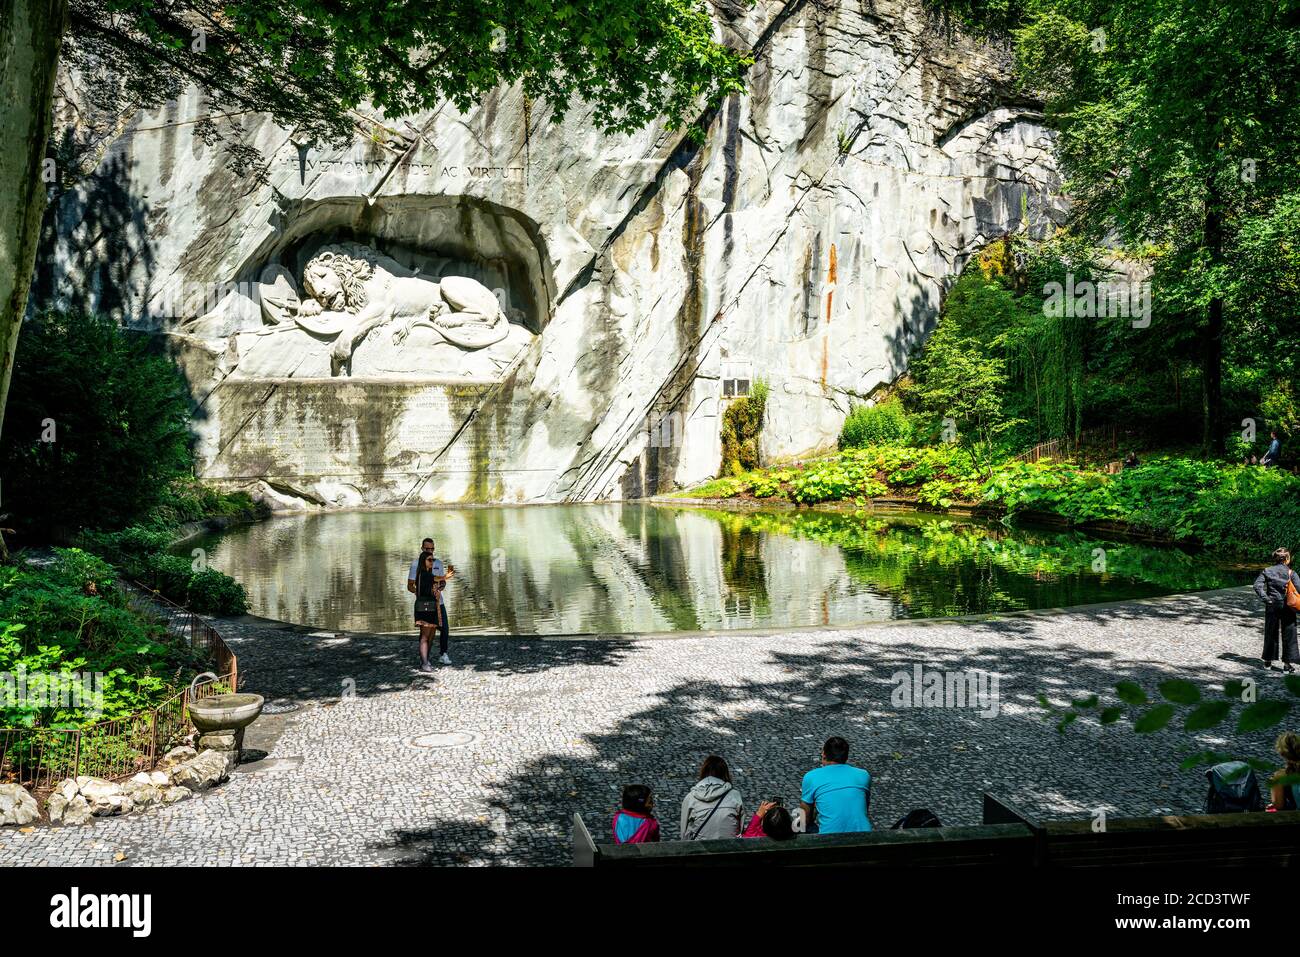 Lucerne Switzerland , 29 June 2020 : Wide angle view of Lion monument and pool with tourists around it in Lucerne Switzerland Stock Photo